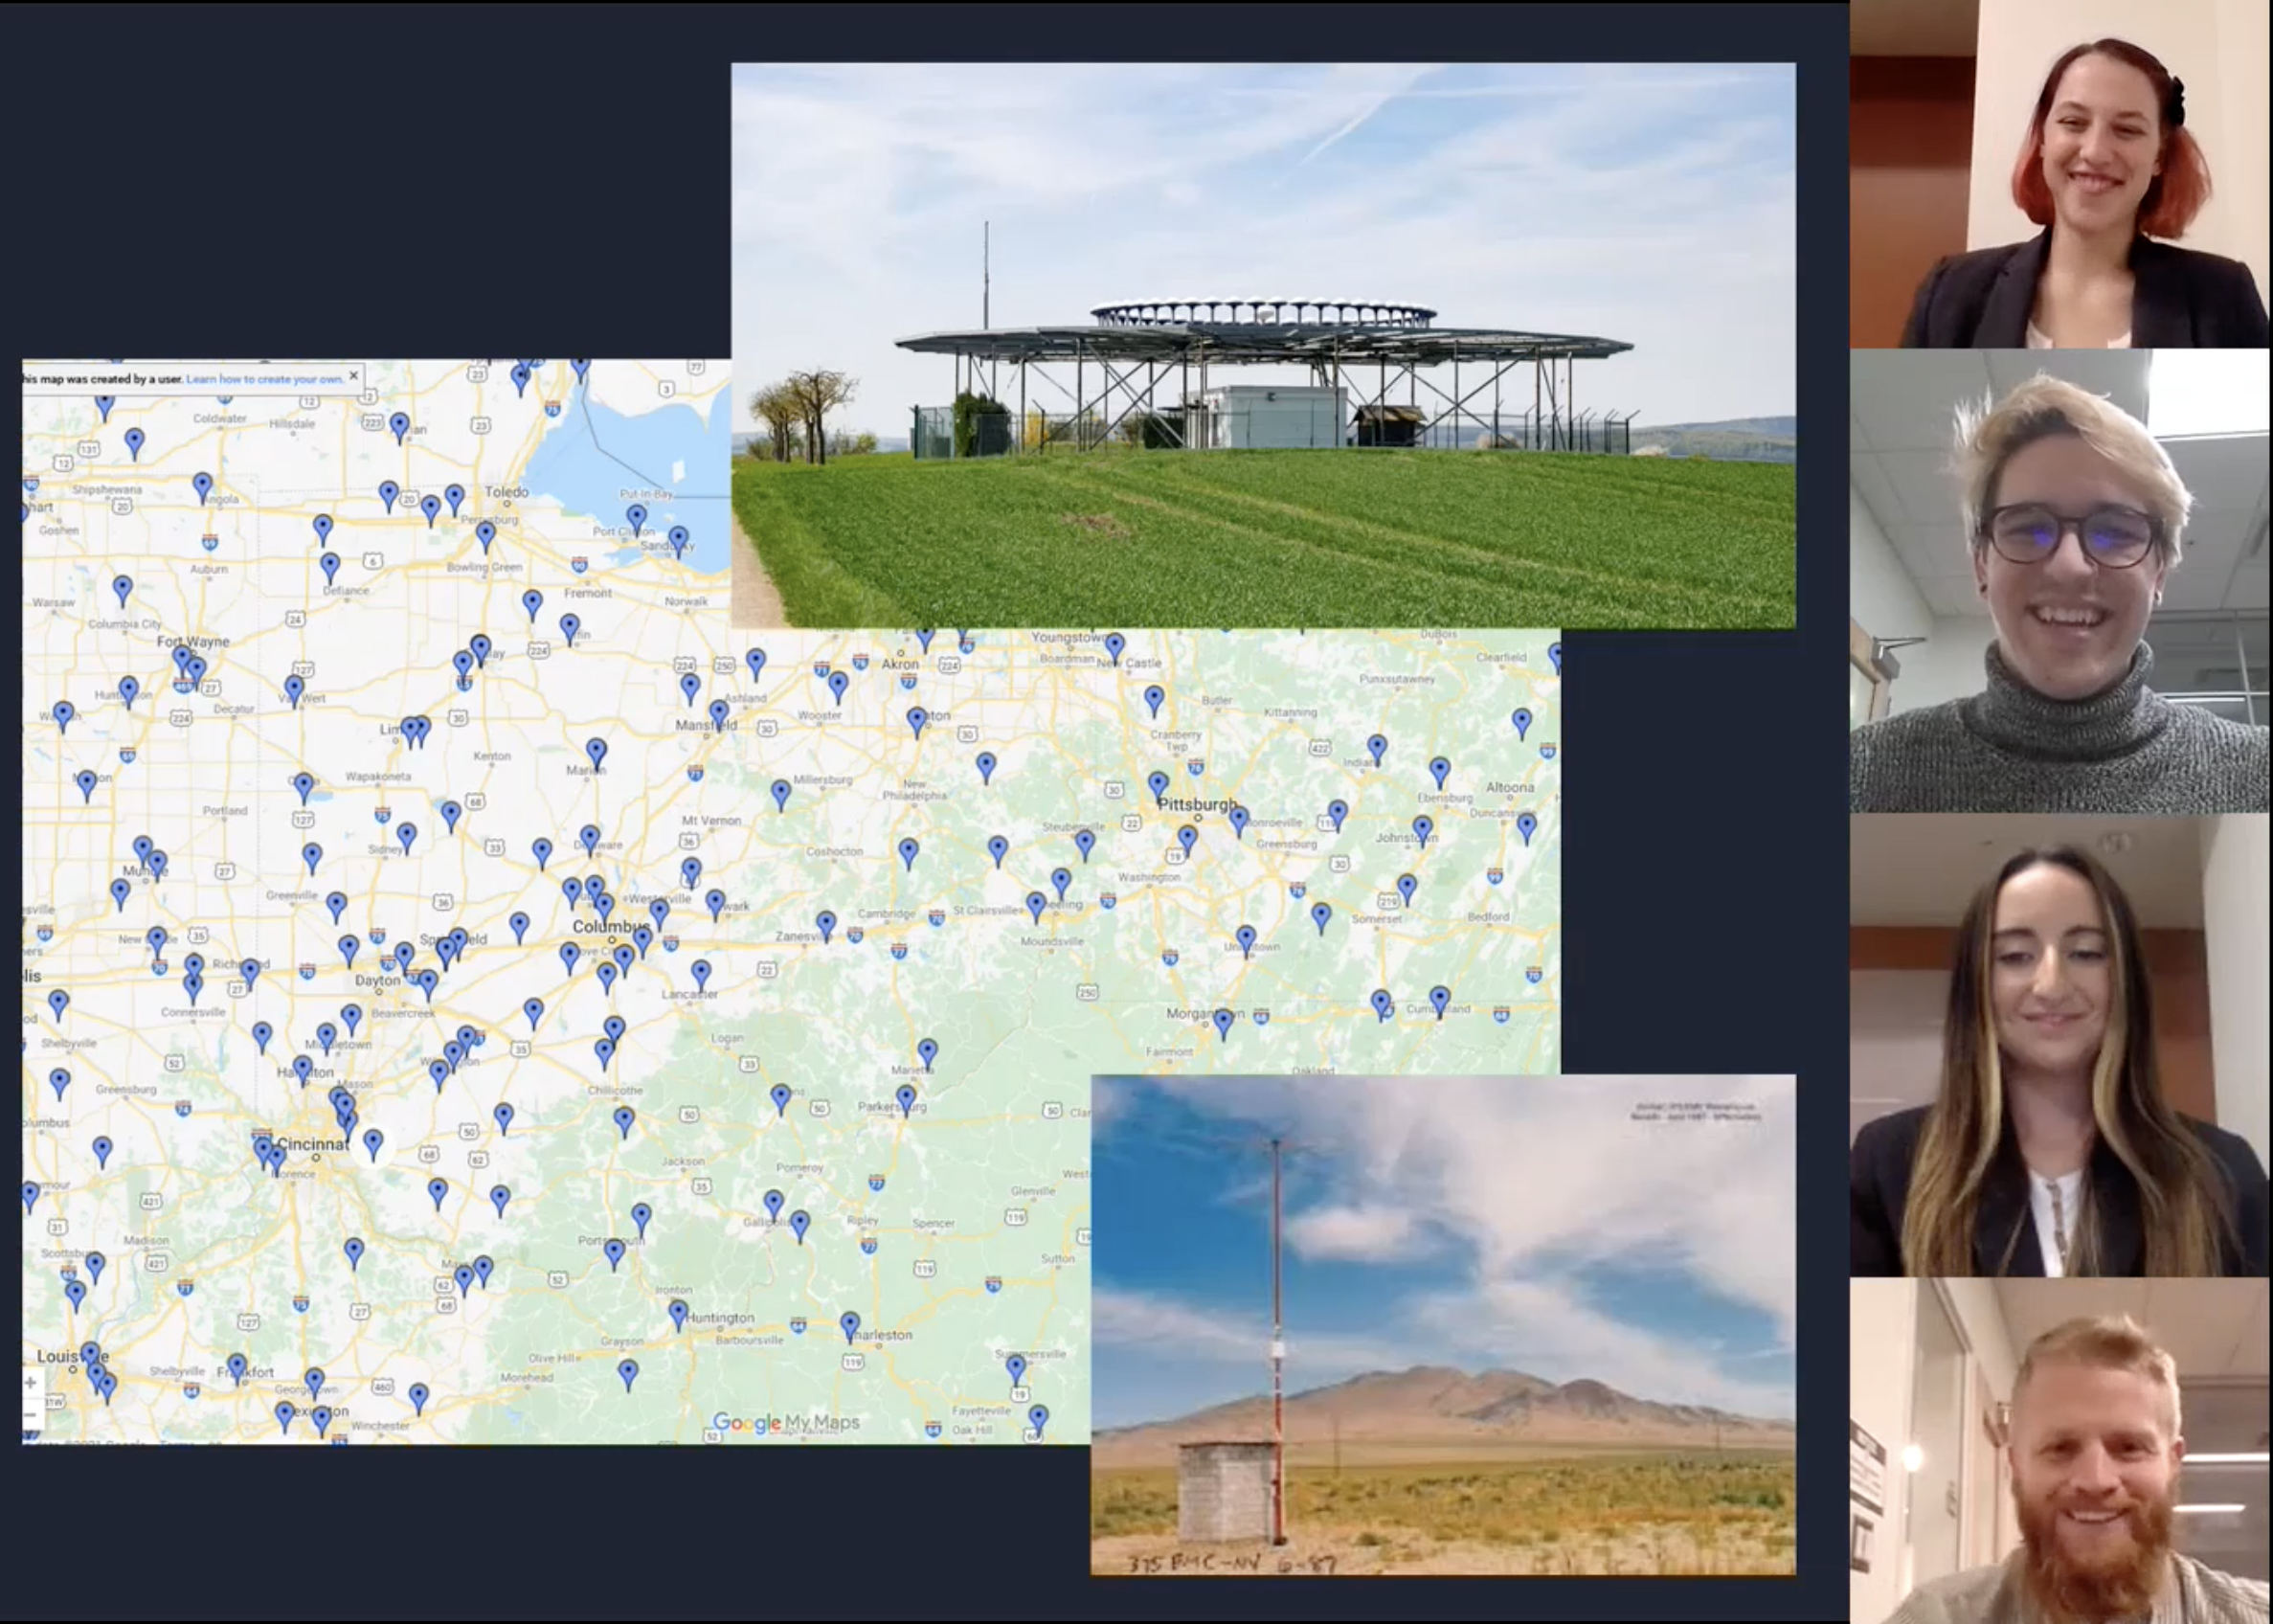 A screenshot of a presentation with images of a map of Ohio, along with images of land, with four webcam sections  showing four students in the corner.